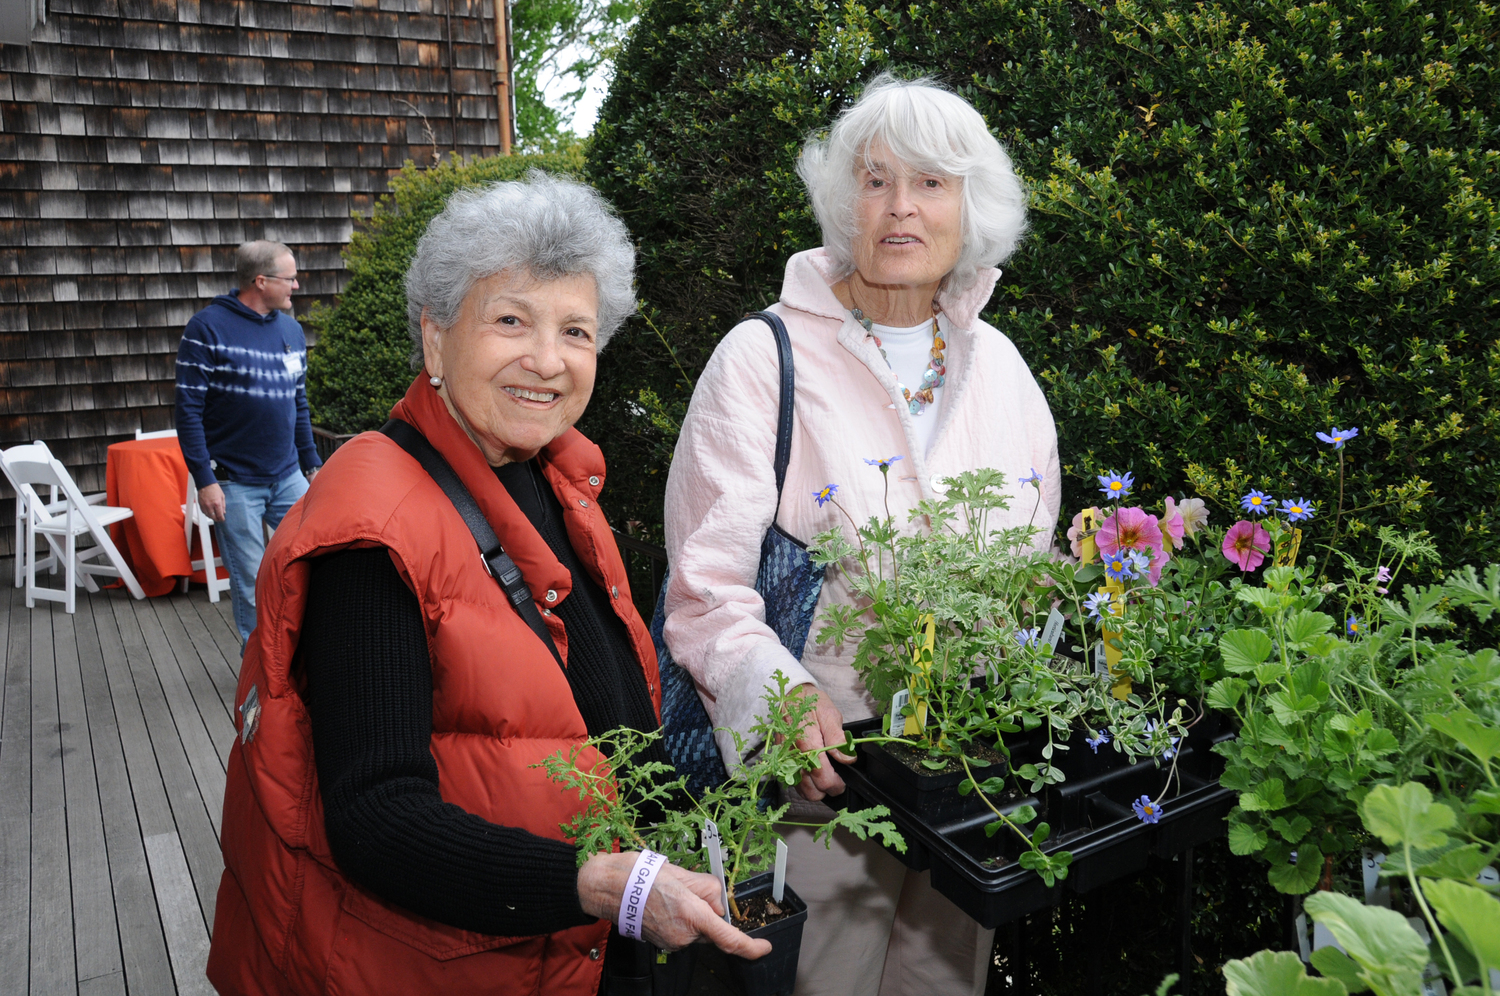 Ada Coniglio and Grania Brolin at the Horticultural Alliance of the Hamptons 2023 Garden Fair preview sale on Friday at the Bridgehampton Community House.   RICHARD LEWIN